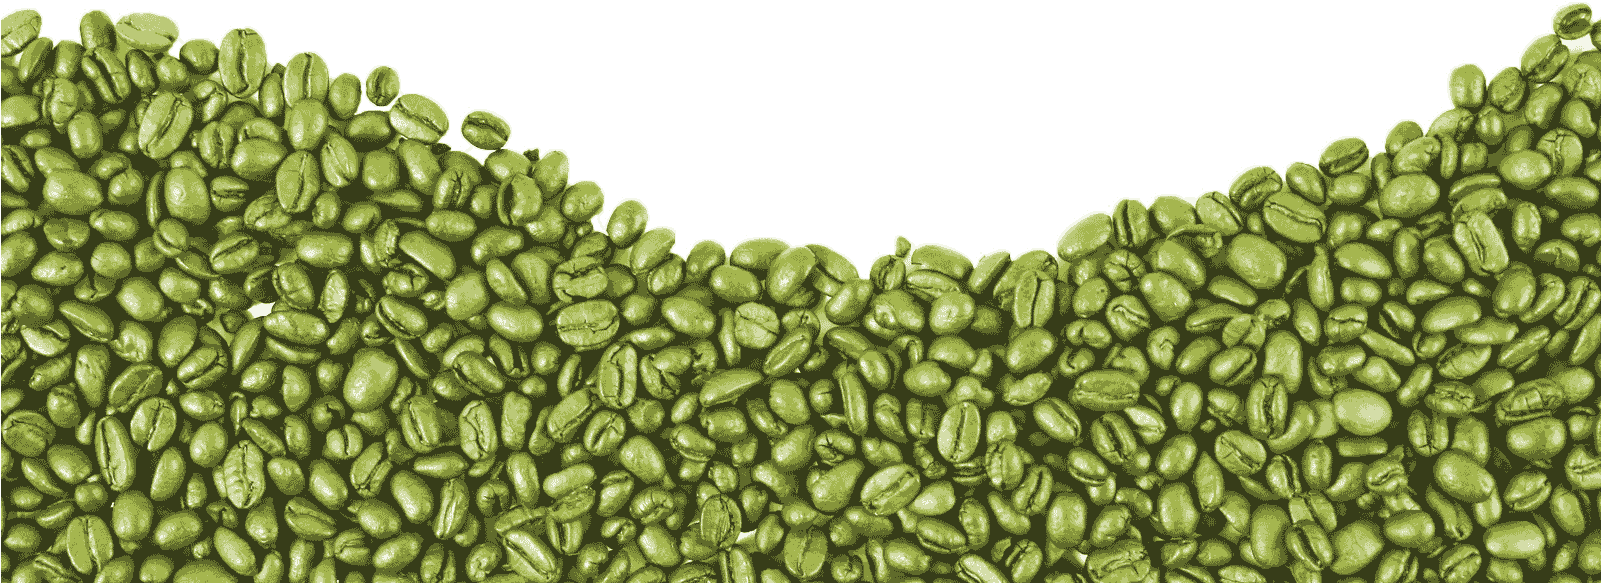 A Close-up Of Green Coffee Beans